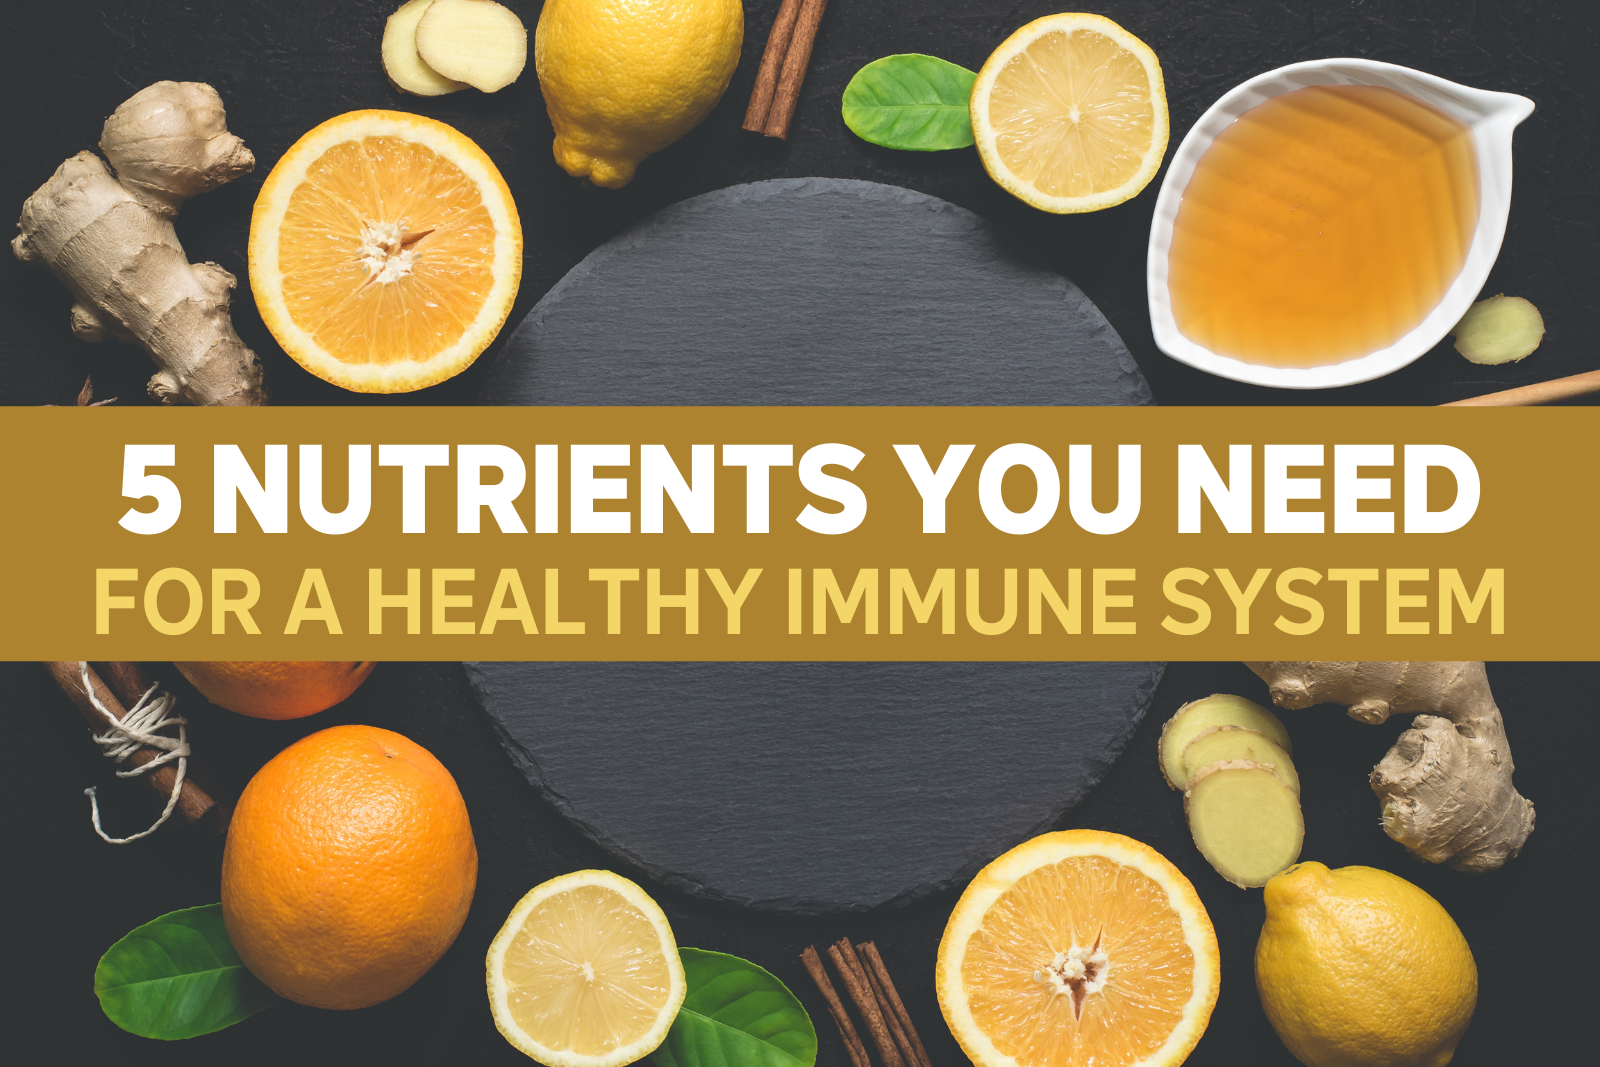 5 Nutrients You Need For a Healthy Immune System